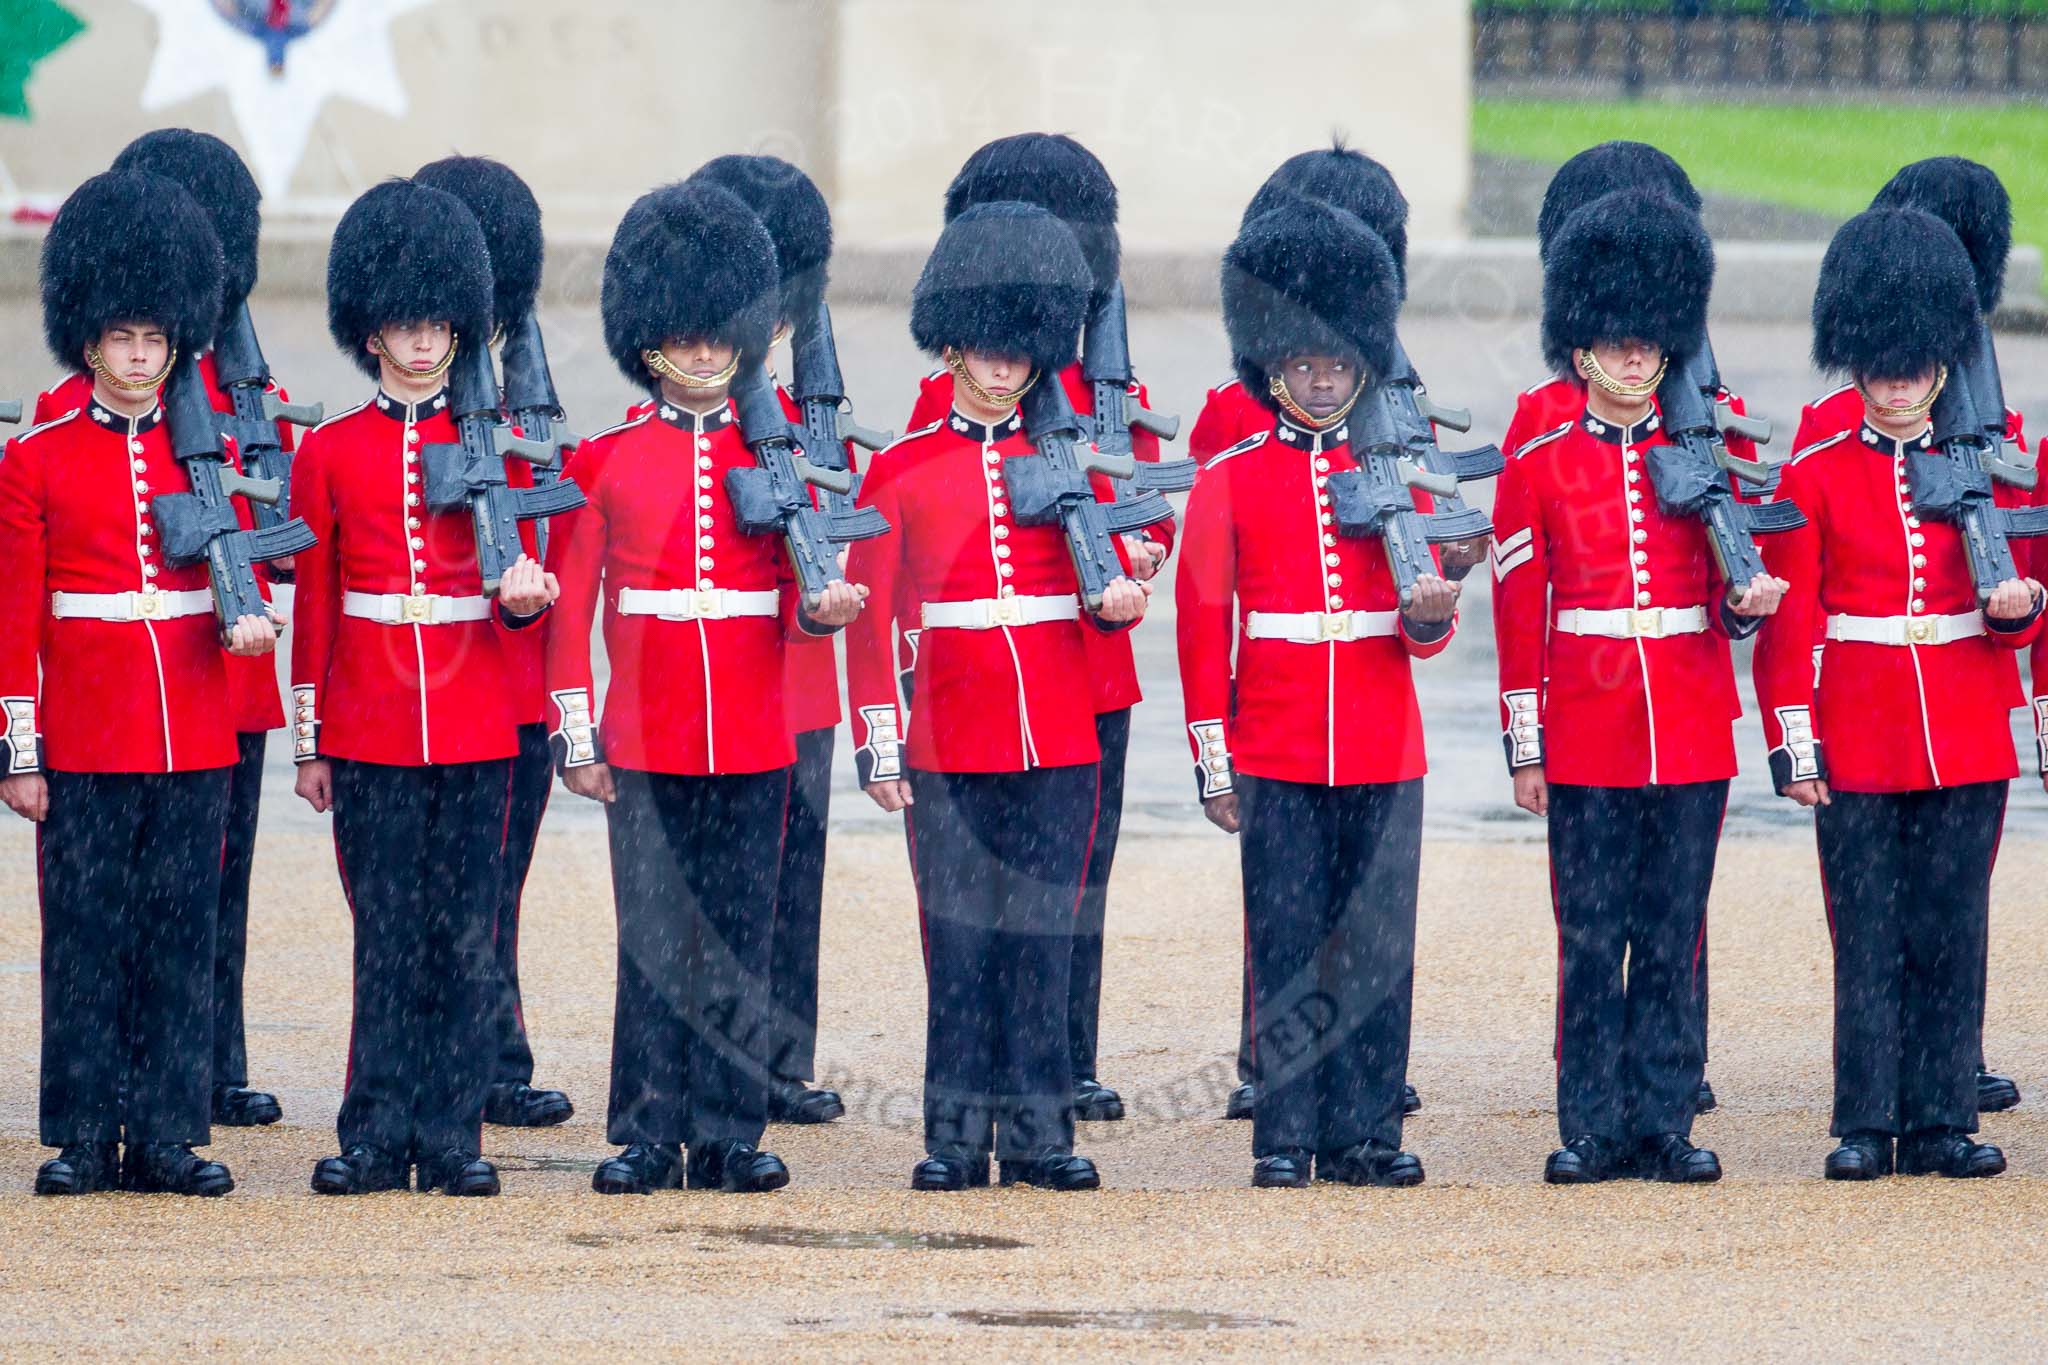 The Colonel's Review 2014.
Horse Guards Parade, Westminster,
London,

United Kingdom,
on 07 June 2014 at 10:37, image #155